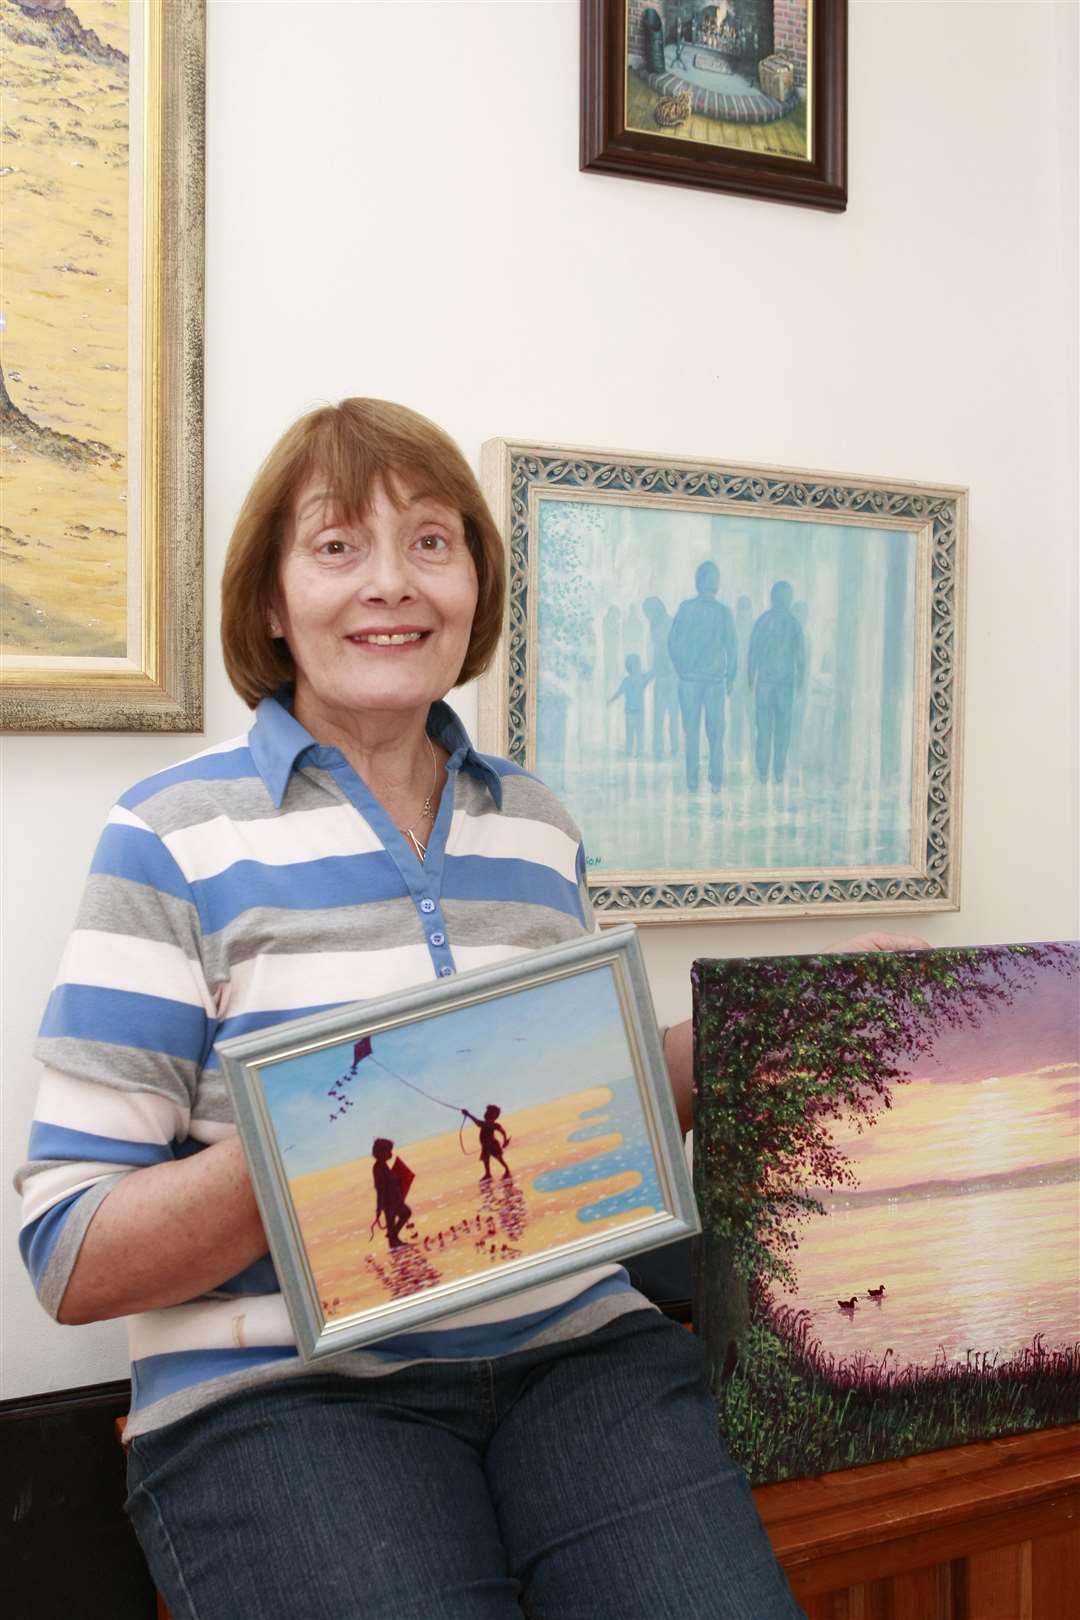 Blind artist Dawn Parkinson wants others to join the book club